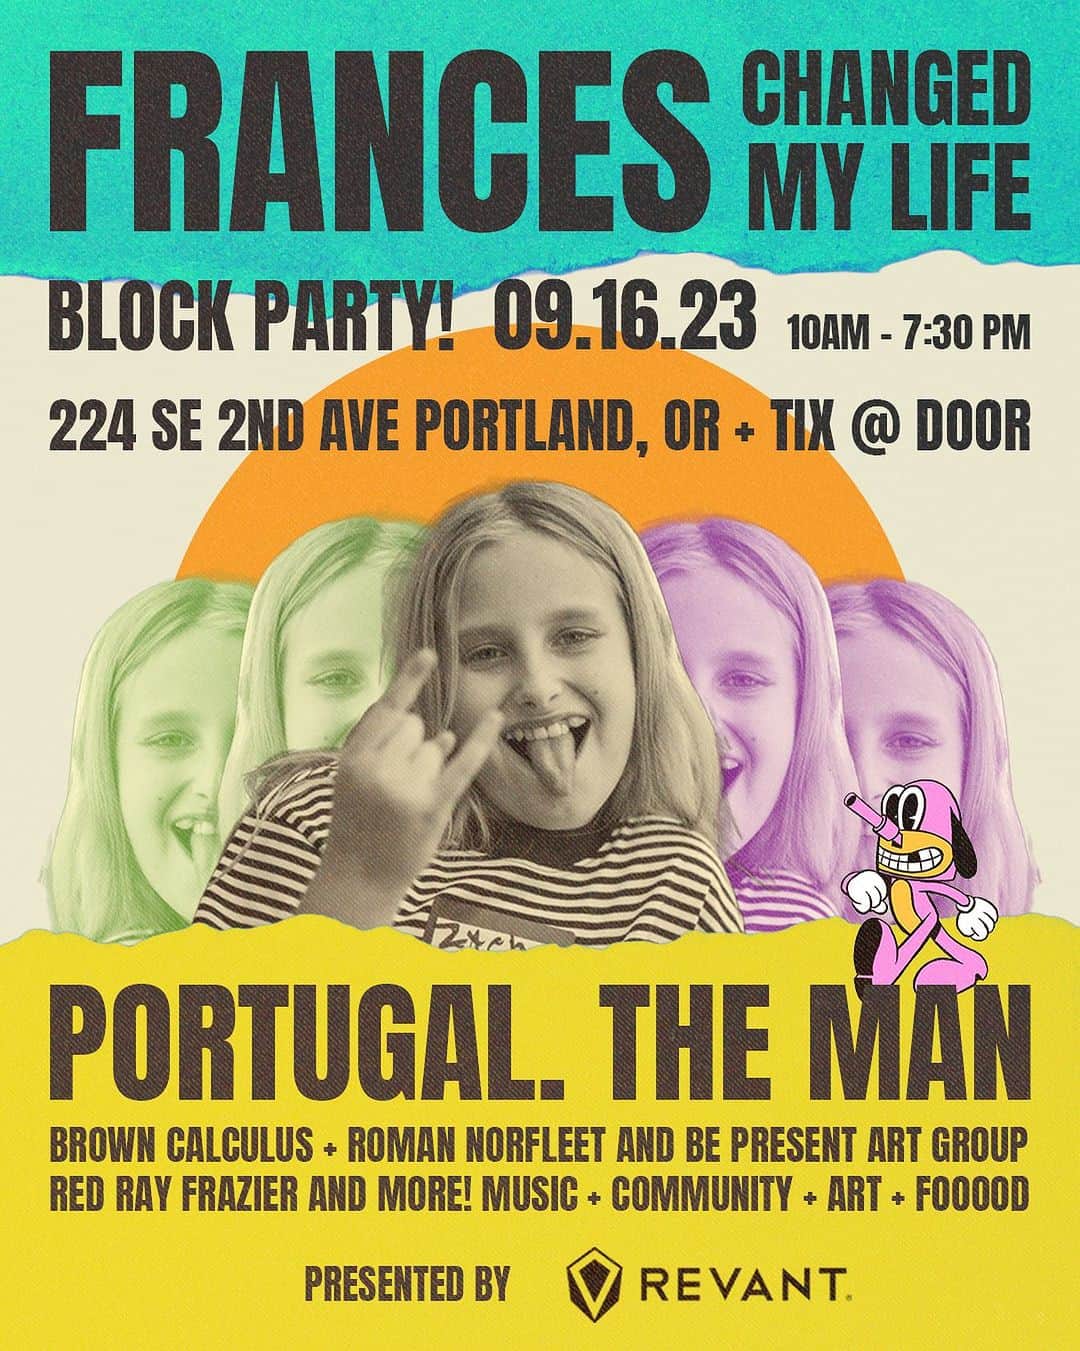 Portlandのインスタグラム：「This Saturday head to the @franceschangedmylife block party presented by @revantoptics!  The lead singer of @portugaltheman daughter Frances, has an extremely rare genetic mutation of DHDDS. She is 1 of 6 known cases in the world and while there was no hope for a cure a decade ago, medical science is now in the experimental phases of developing treatments for rare diseases.  Money from this fundraiser will go to research and helping the families of these children.  Come watch Portugal the man, be in community, and support one another this Saturday.」